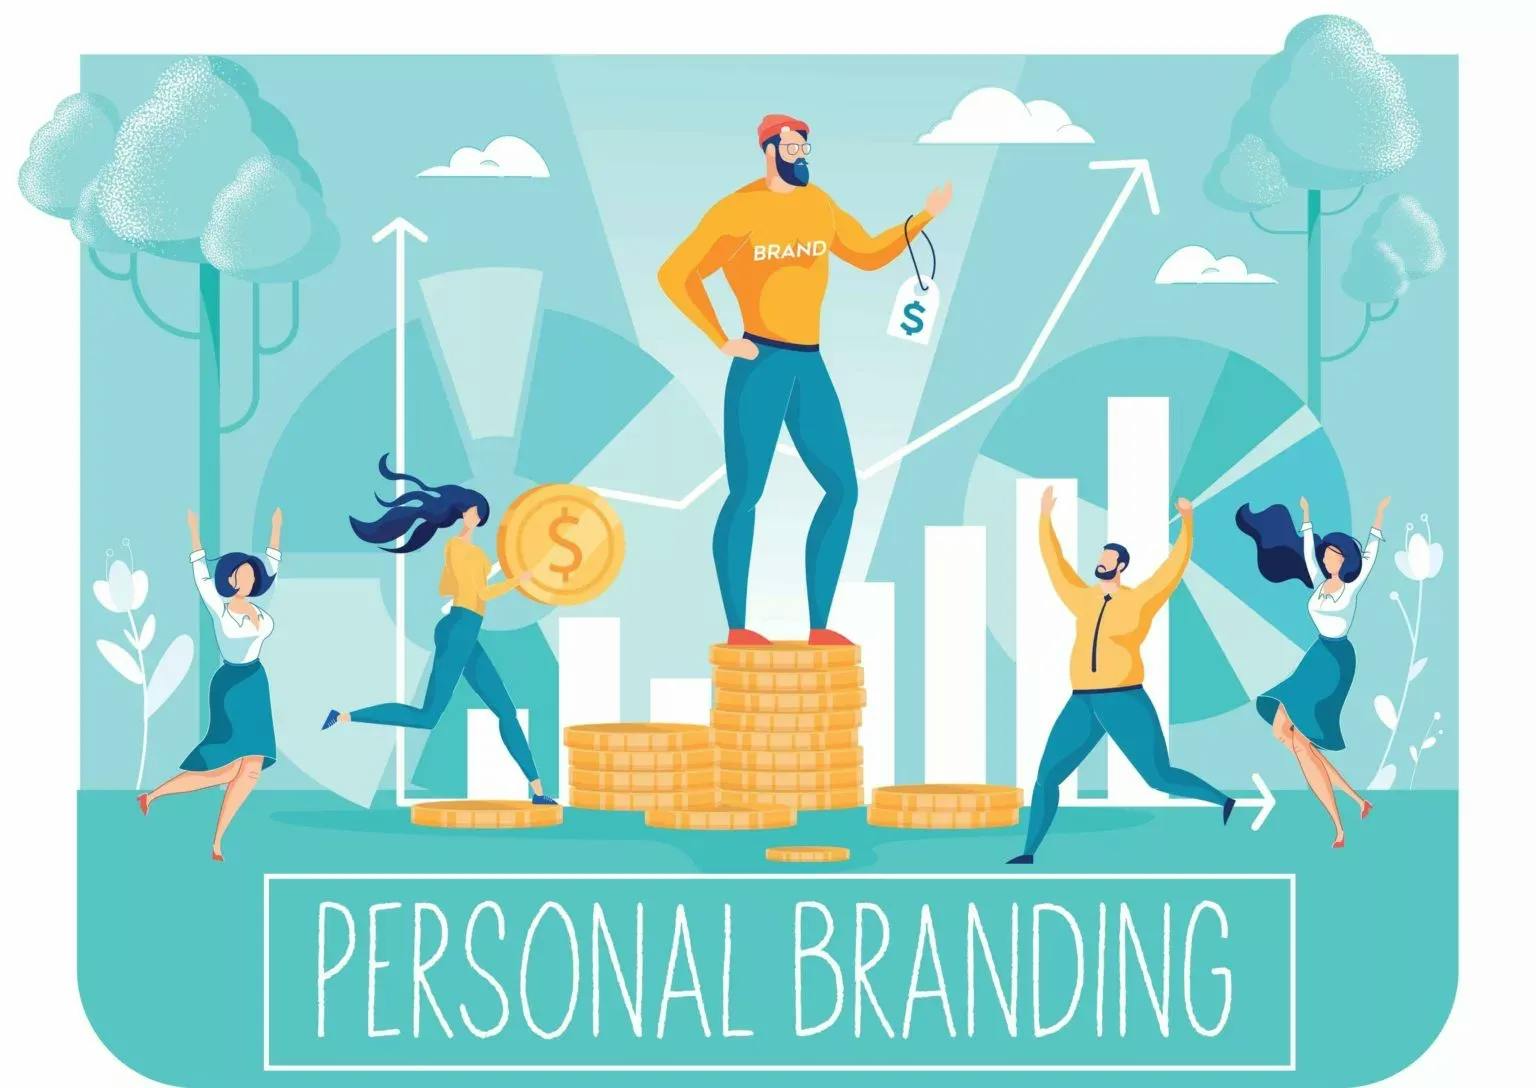 Creating-personal-branding-is-necessary